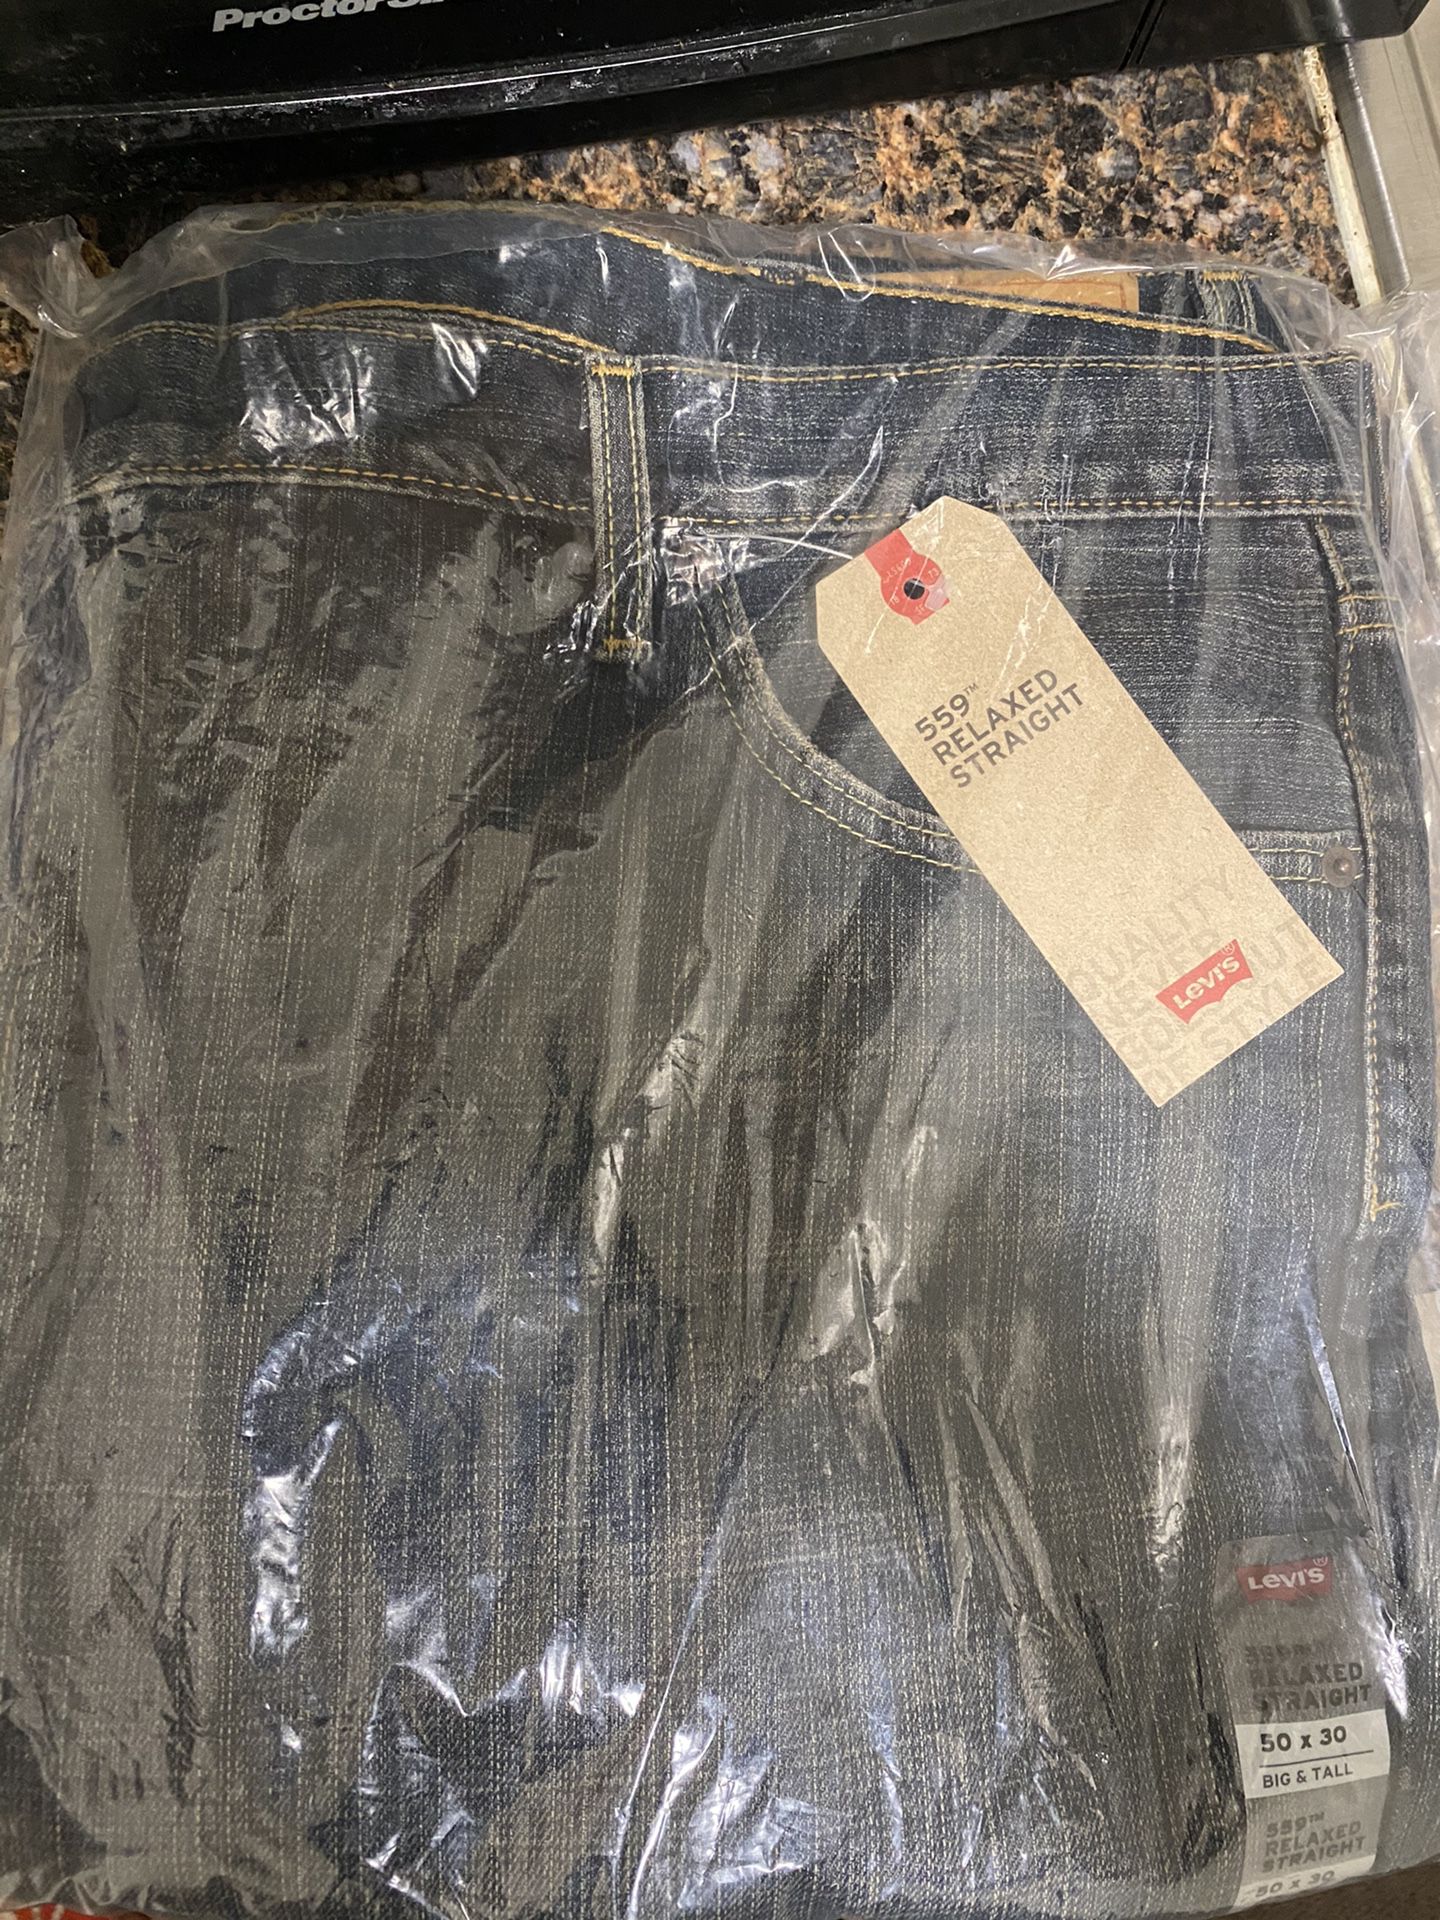 LEVI’S RELAXED STRAIGHT JEANS 👖 SIZE 50#30 BIG & TALL💯🔥🔥